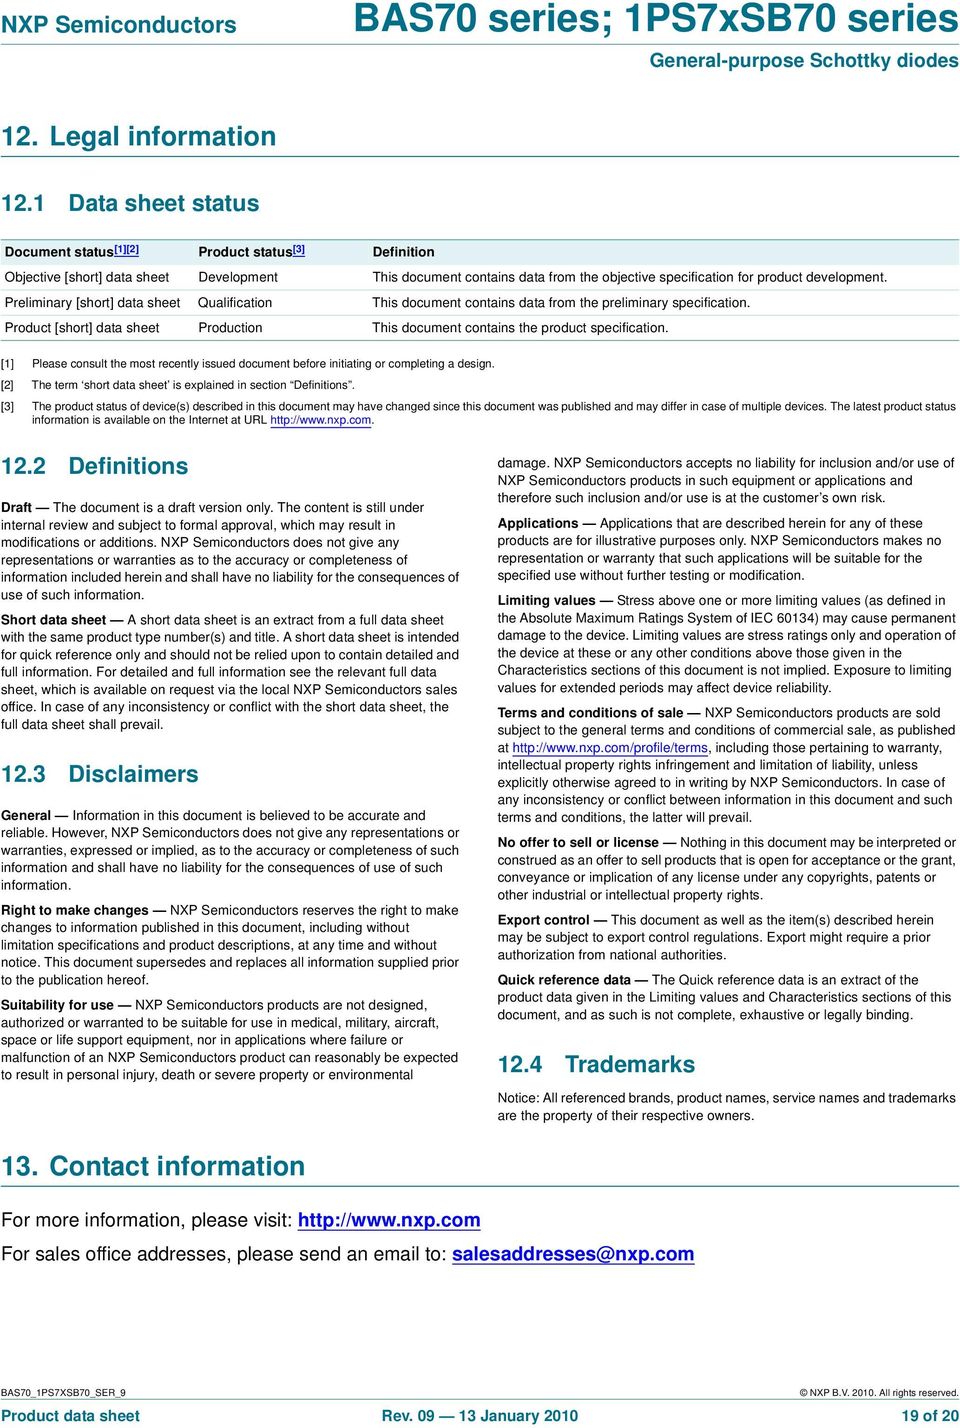 Preliminary [short] data sheet Qualification This document contains data from the preliminary specification. Product [short] data sheet Production This document contains the product specification.